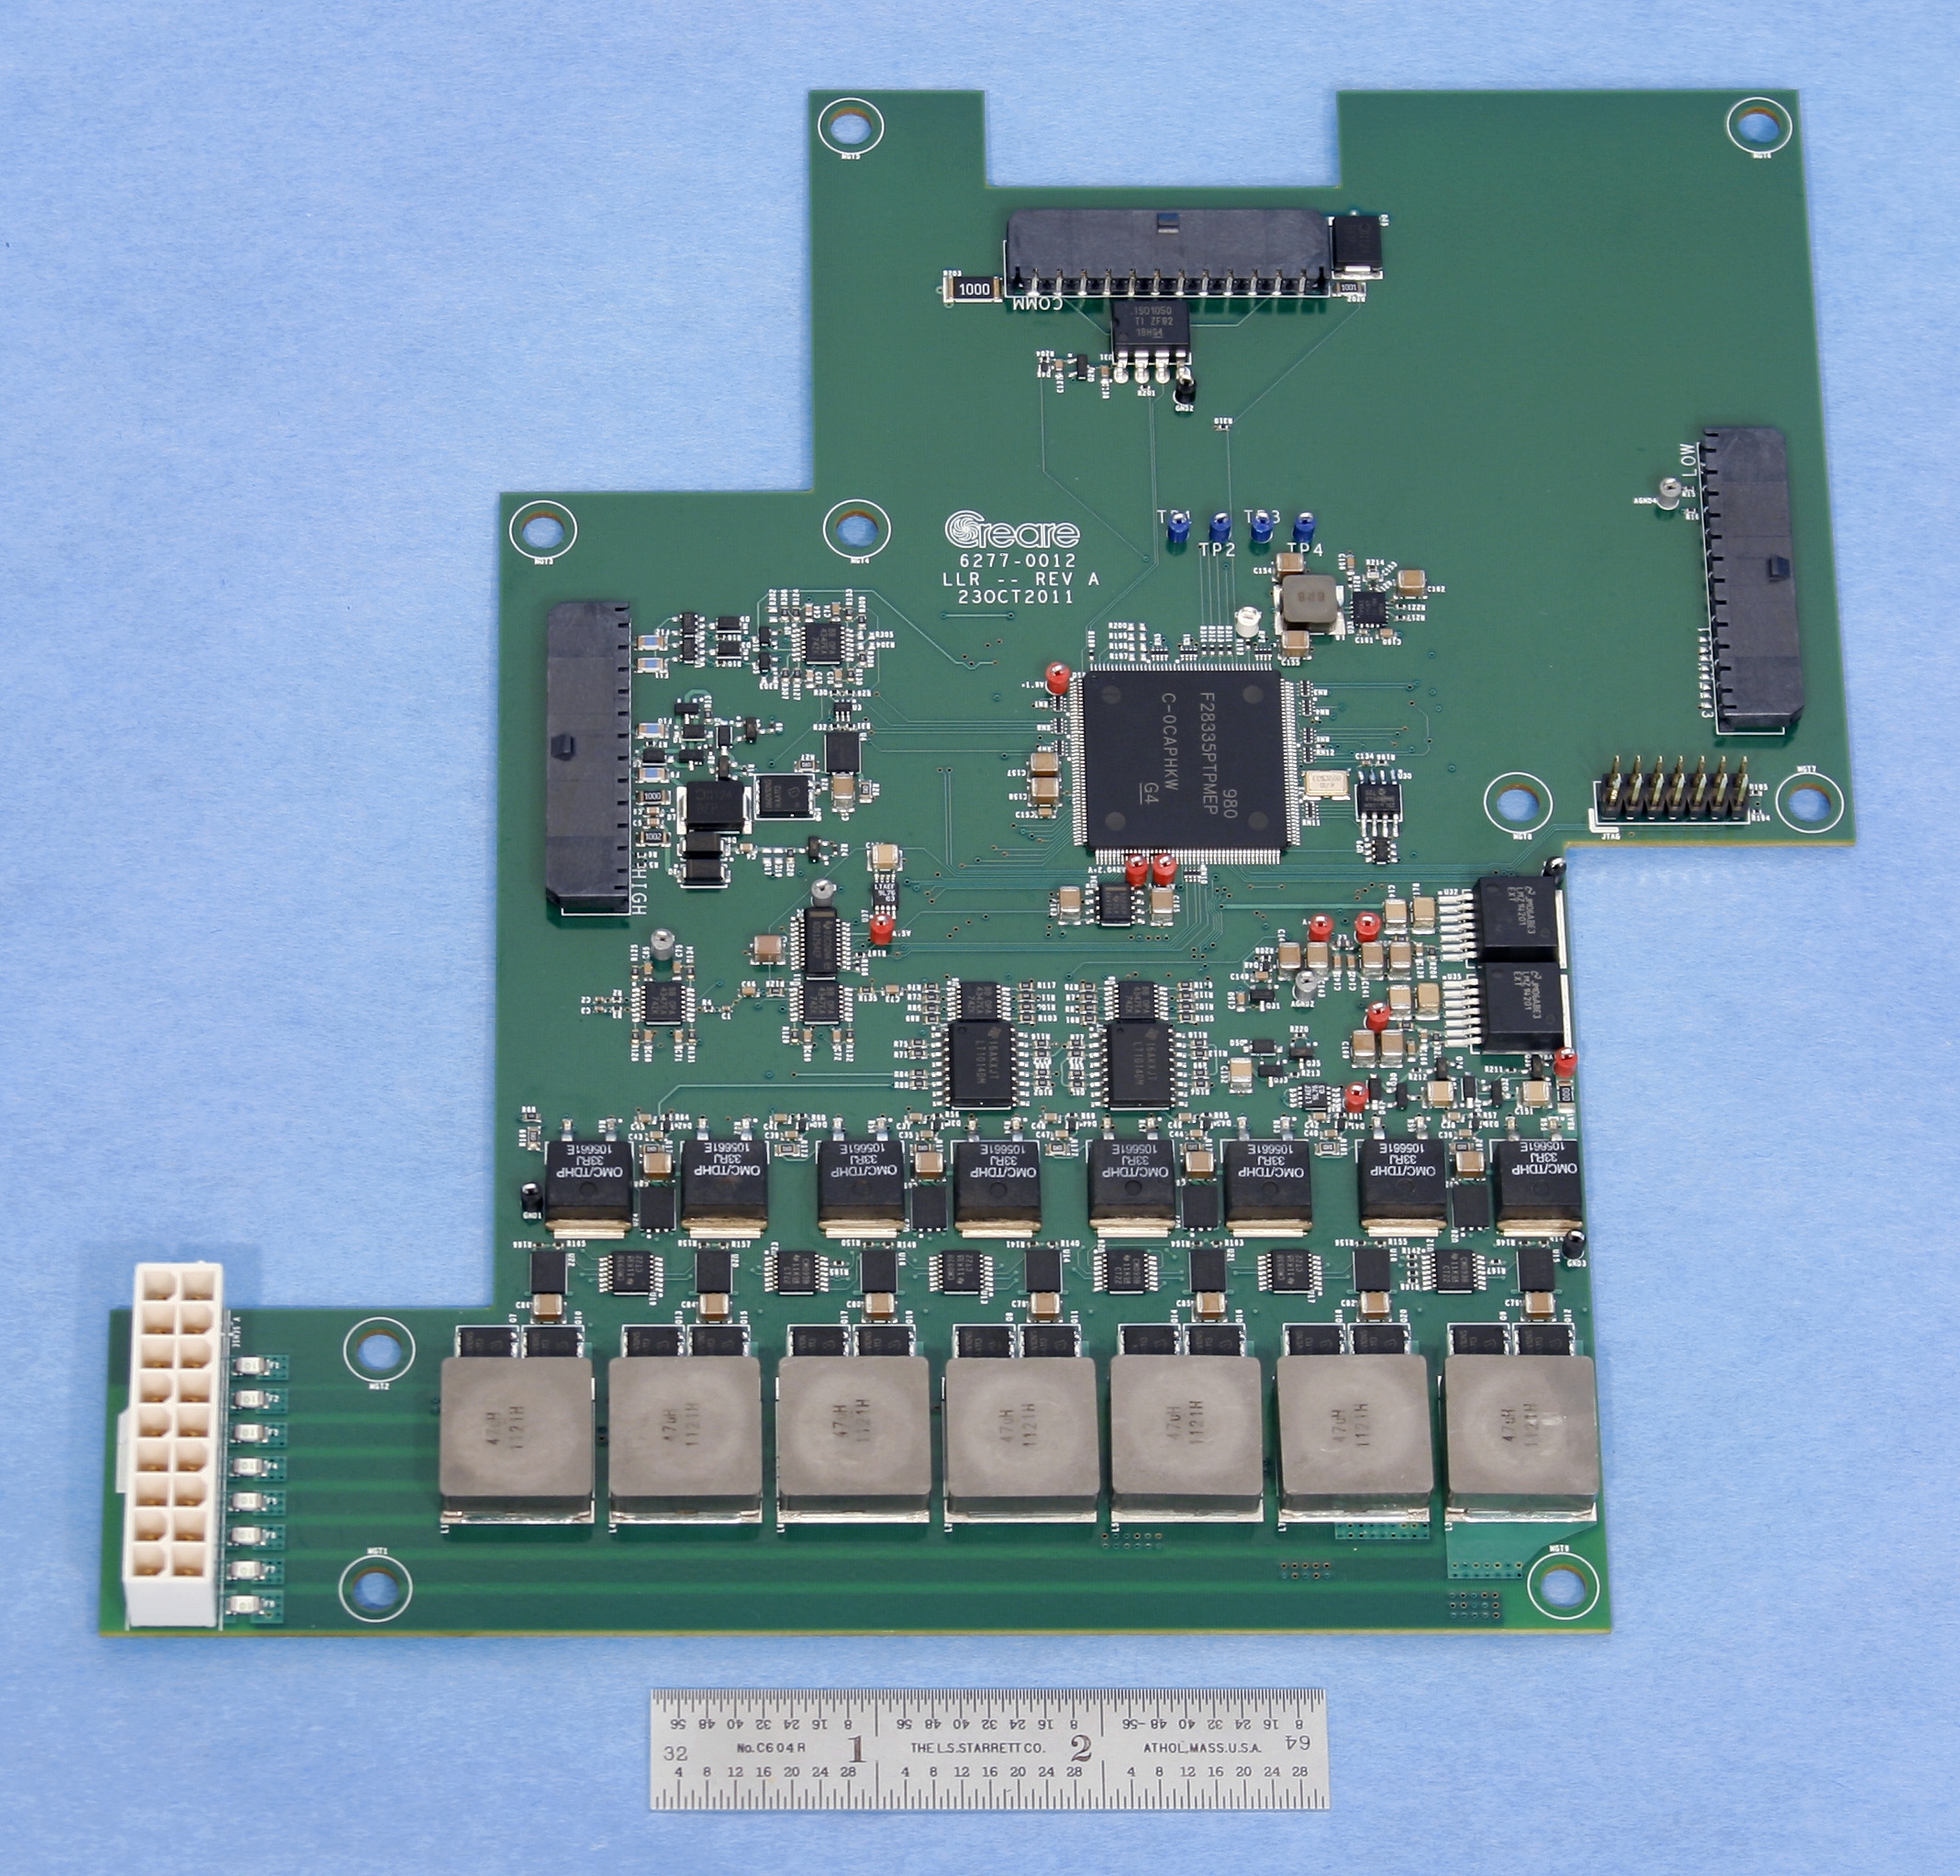 Circuit board for Creare's battery management system (BMS)